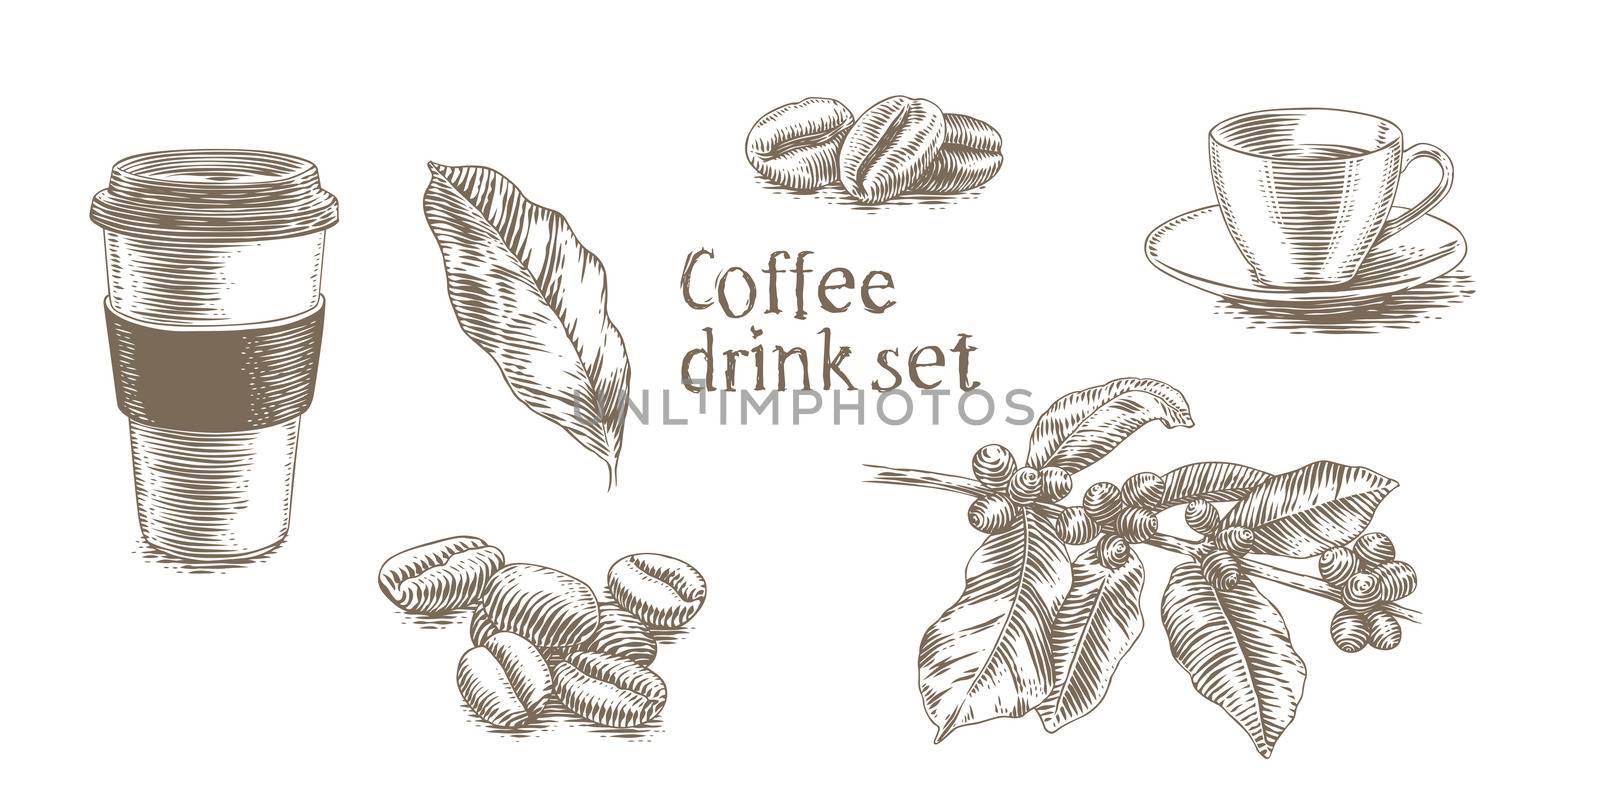 Set of pictures about coffee drink (cups, plant, coffee beans)